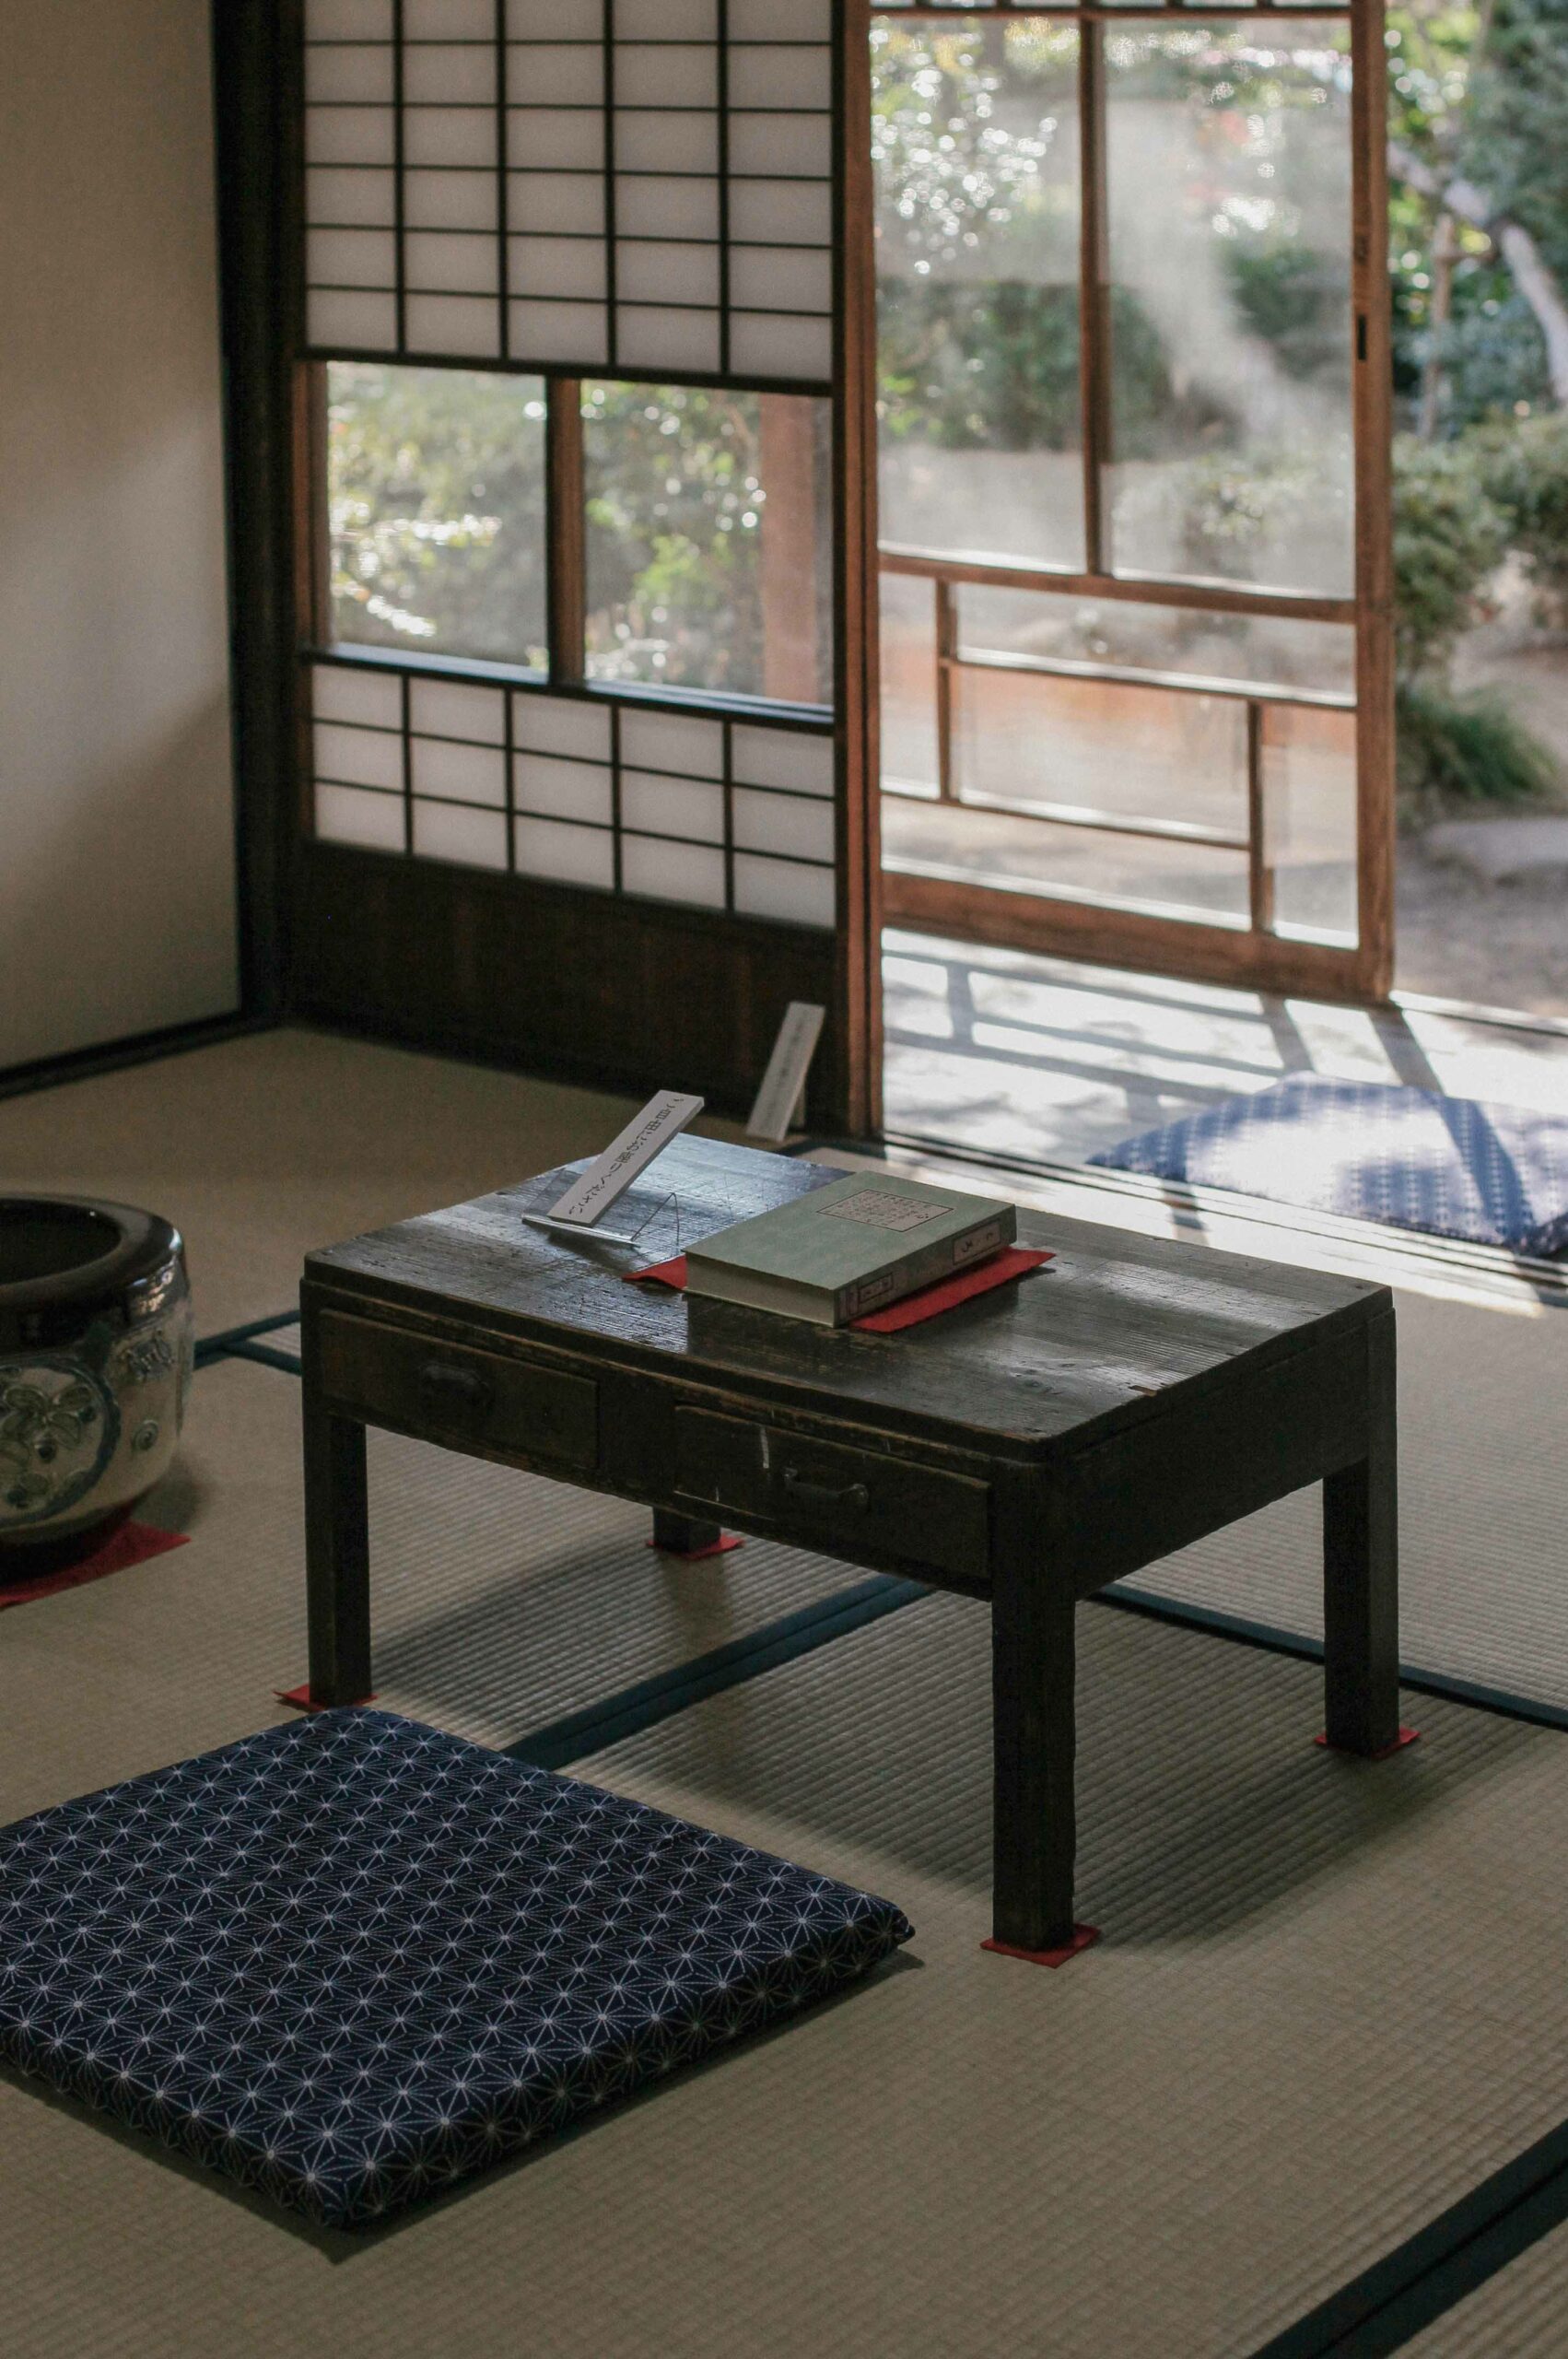 Sо̄seki Natsume's desk looked out through glass doors and into his peaceful garden.